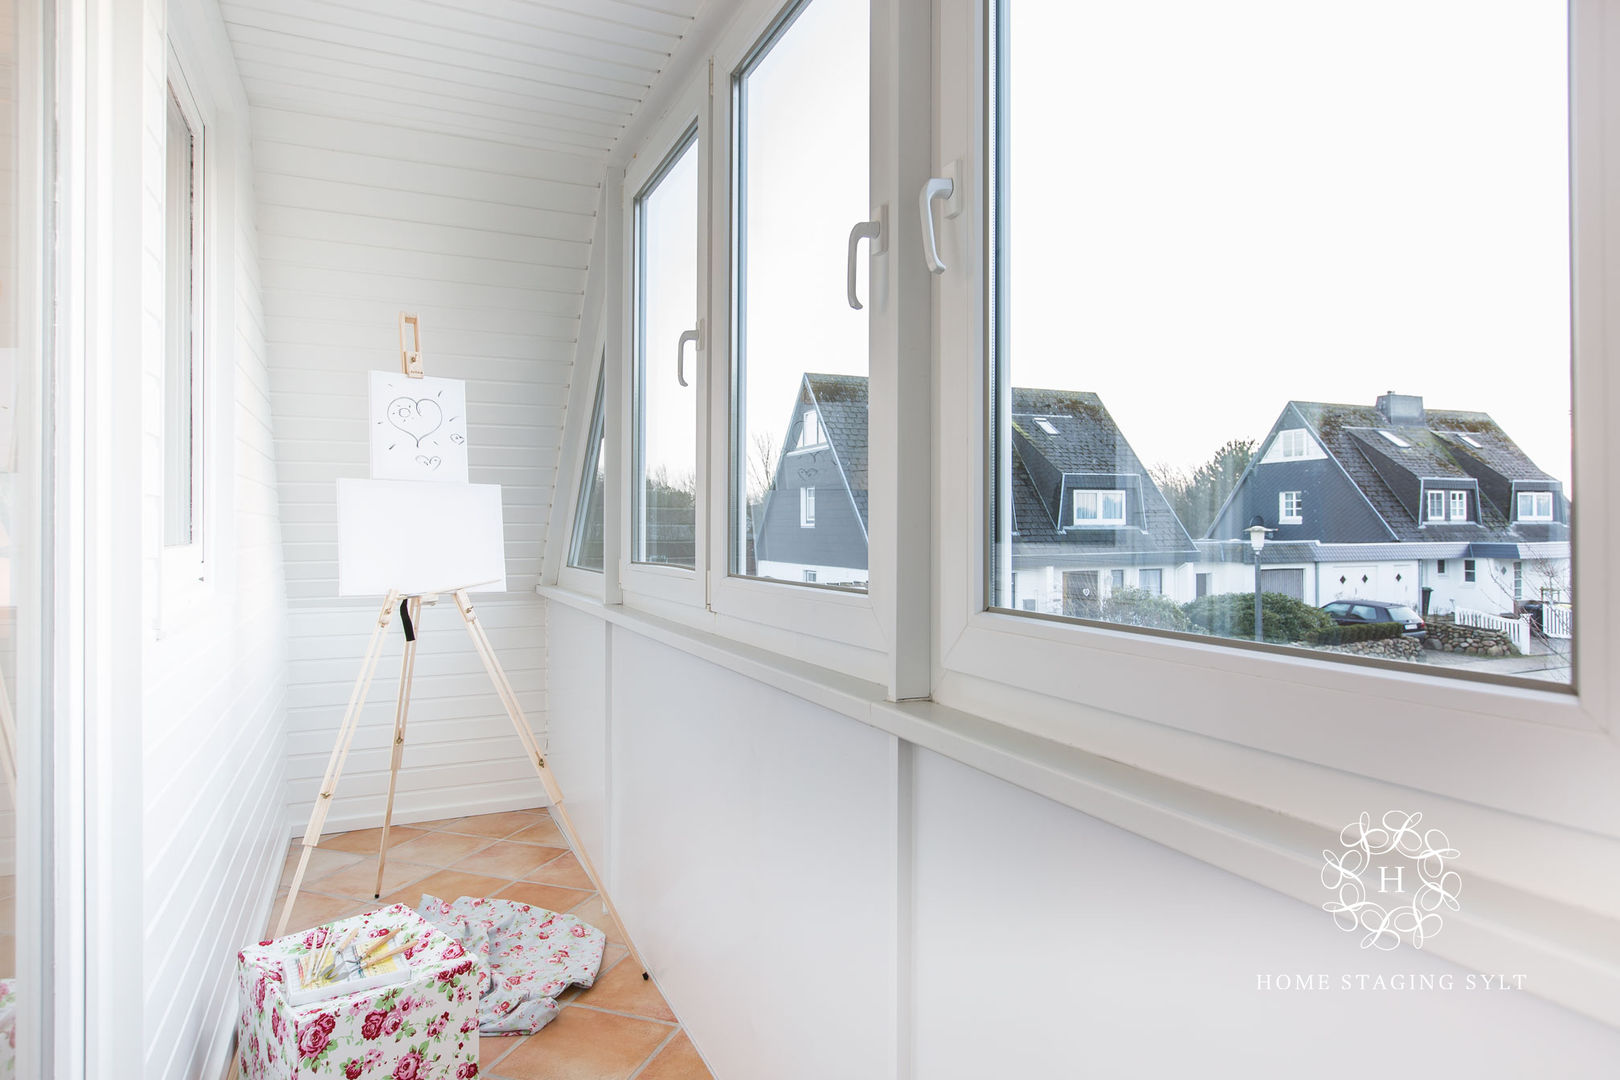 Home Staging Doppelhaus in Westerland/Sylt, Home Staging Sylt GmbH Home Staging Sylt GmbH Terrace